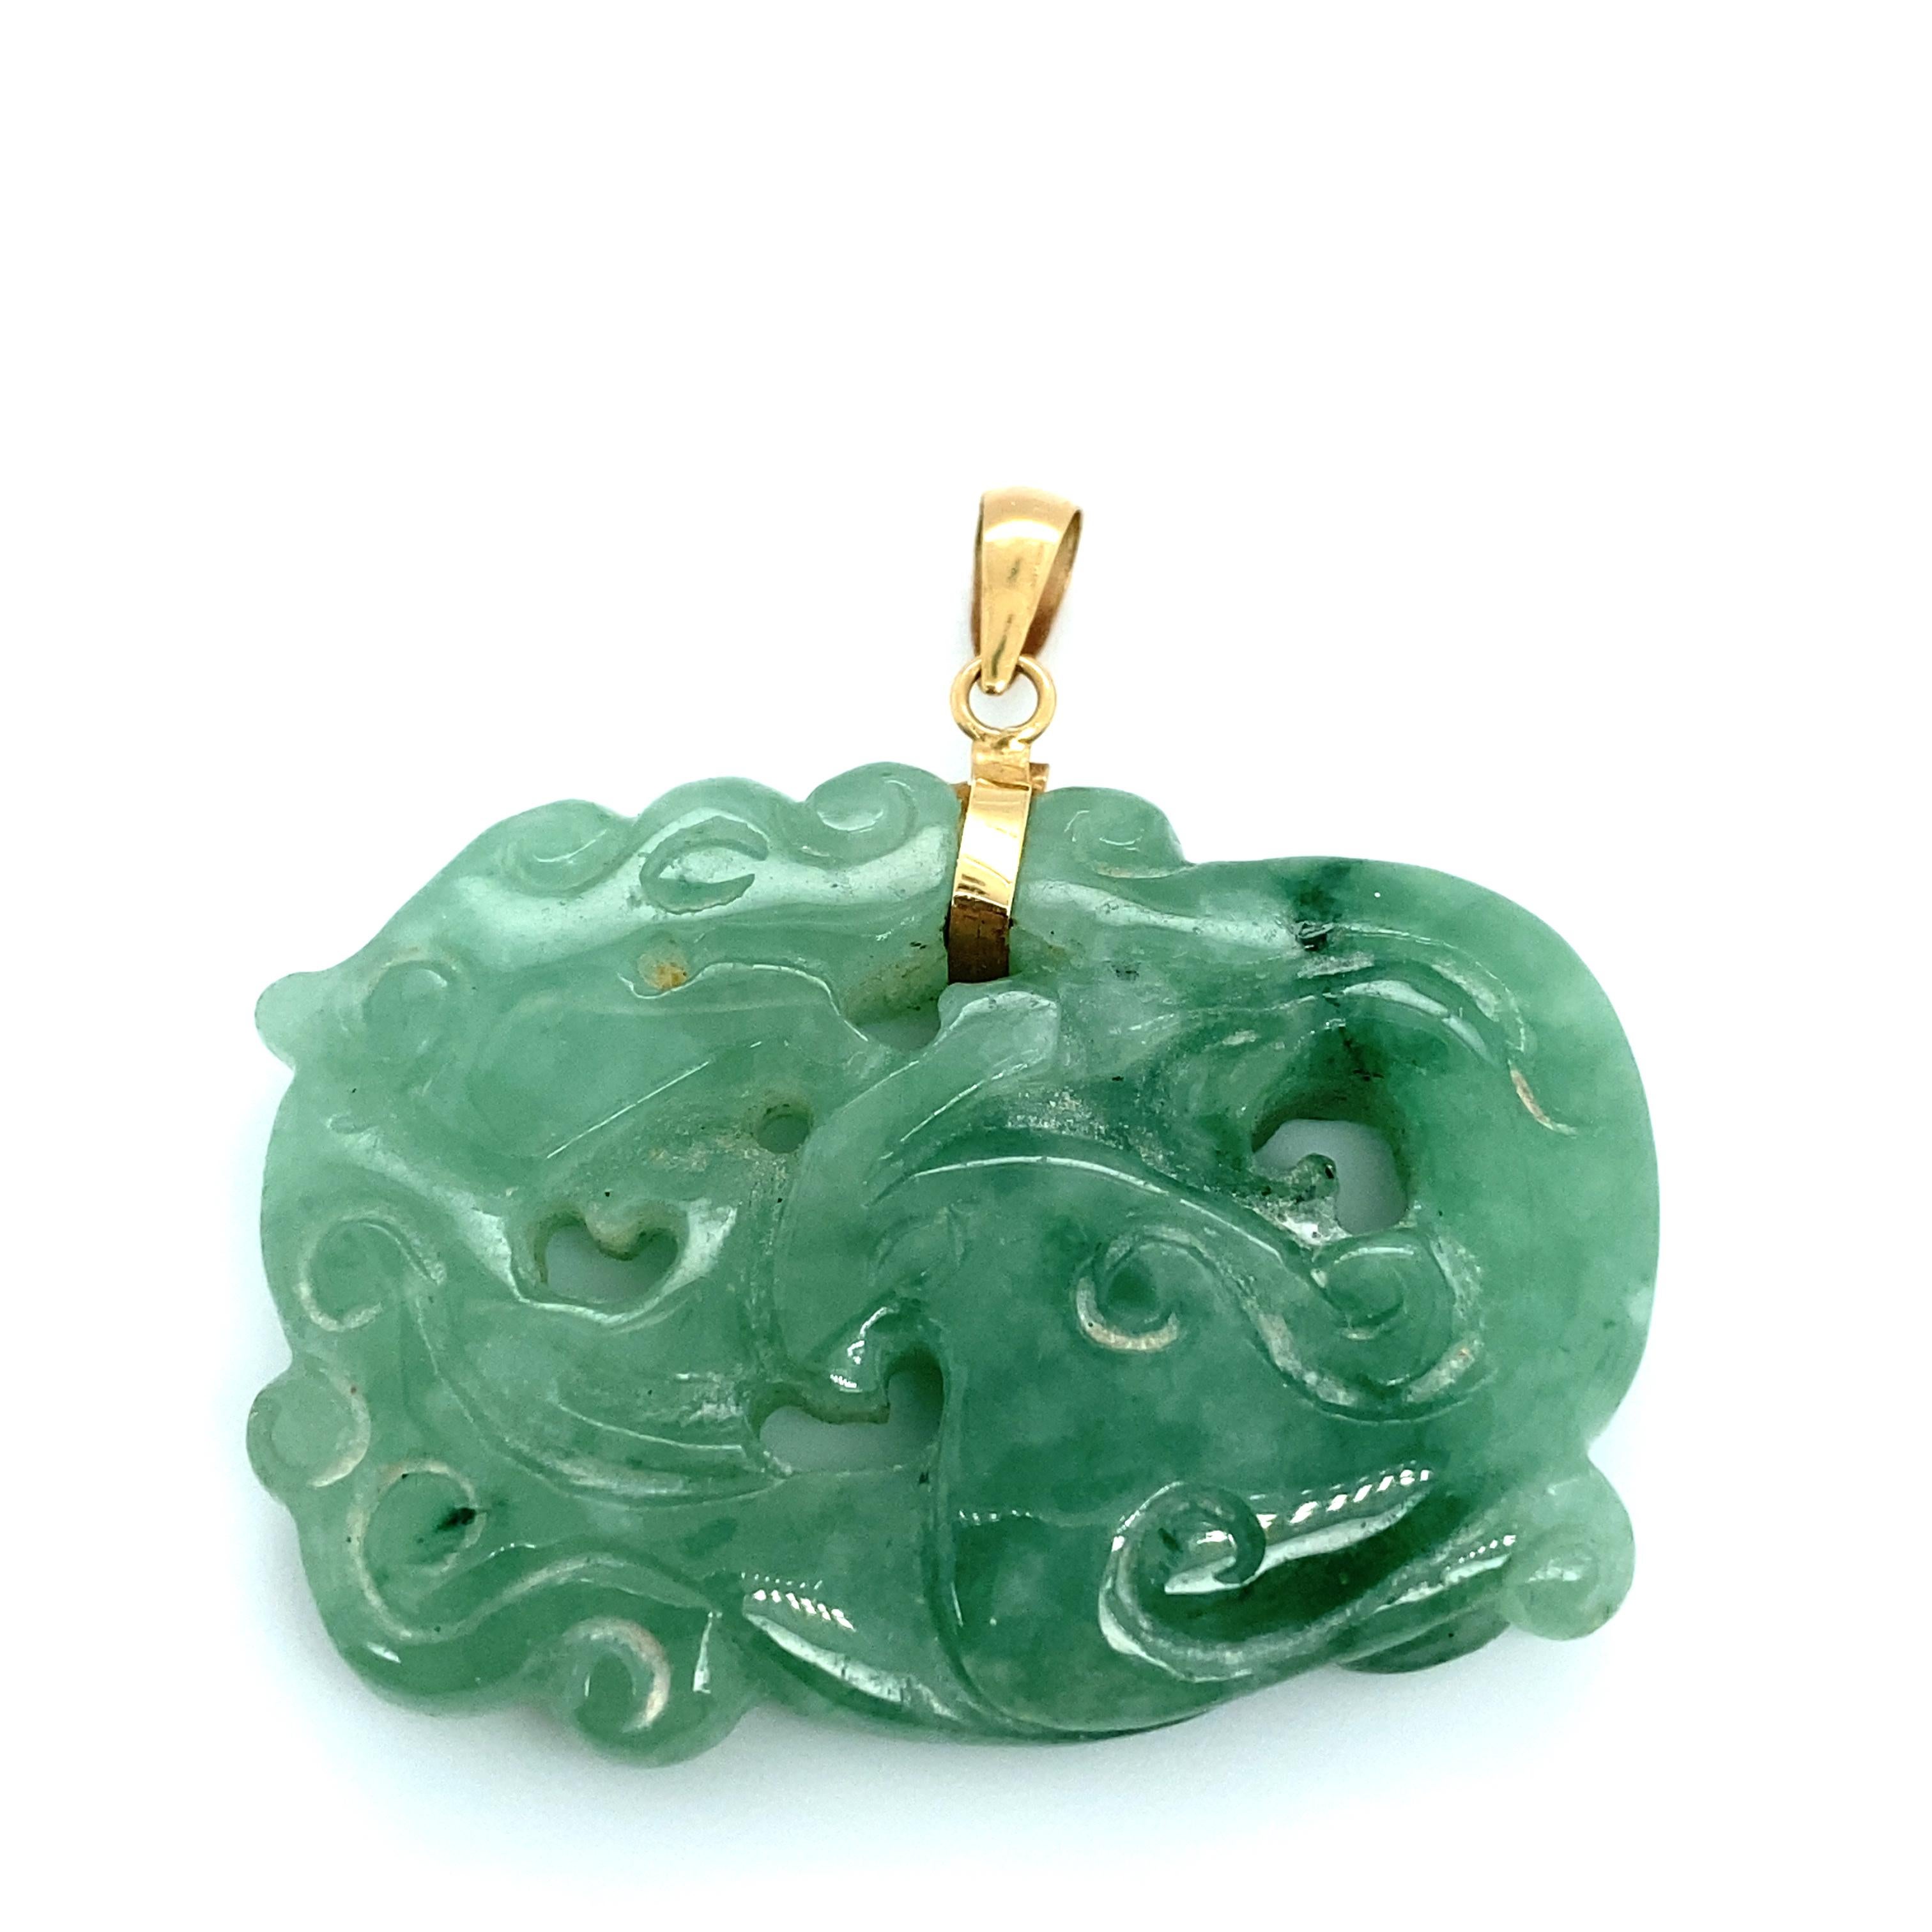 Item Details: This Asian carved jade pendant has an intricate design of a dragon with a 14 karat gold bail. The hues of green are absolutely stunning. 

Circa: 2000s
Metal Type:  14 Karat Gold
Weight: 15.2 grams
Size: 1.75 inch Width 